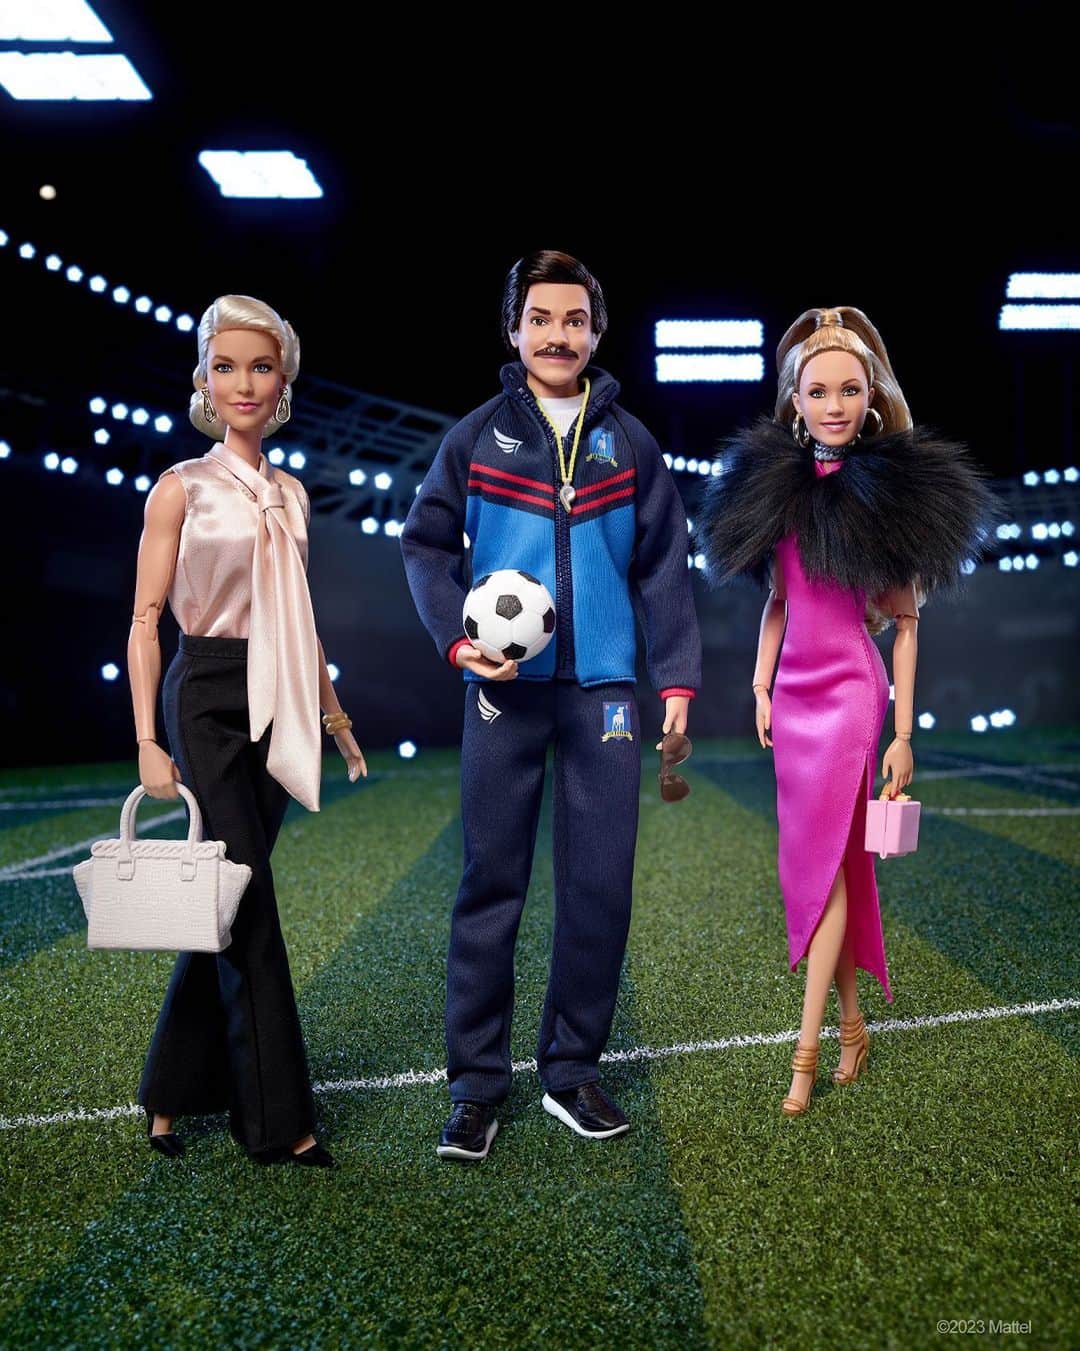 Mattelのインスタグラム：「Ted, Rebecca, and Keeley. You better BELIEVE it! ⚽ #Barbie Signature dolls inspired by the hit show #TedLasso available now on Mattel Creations.」